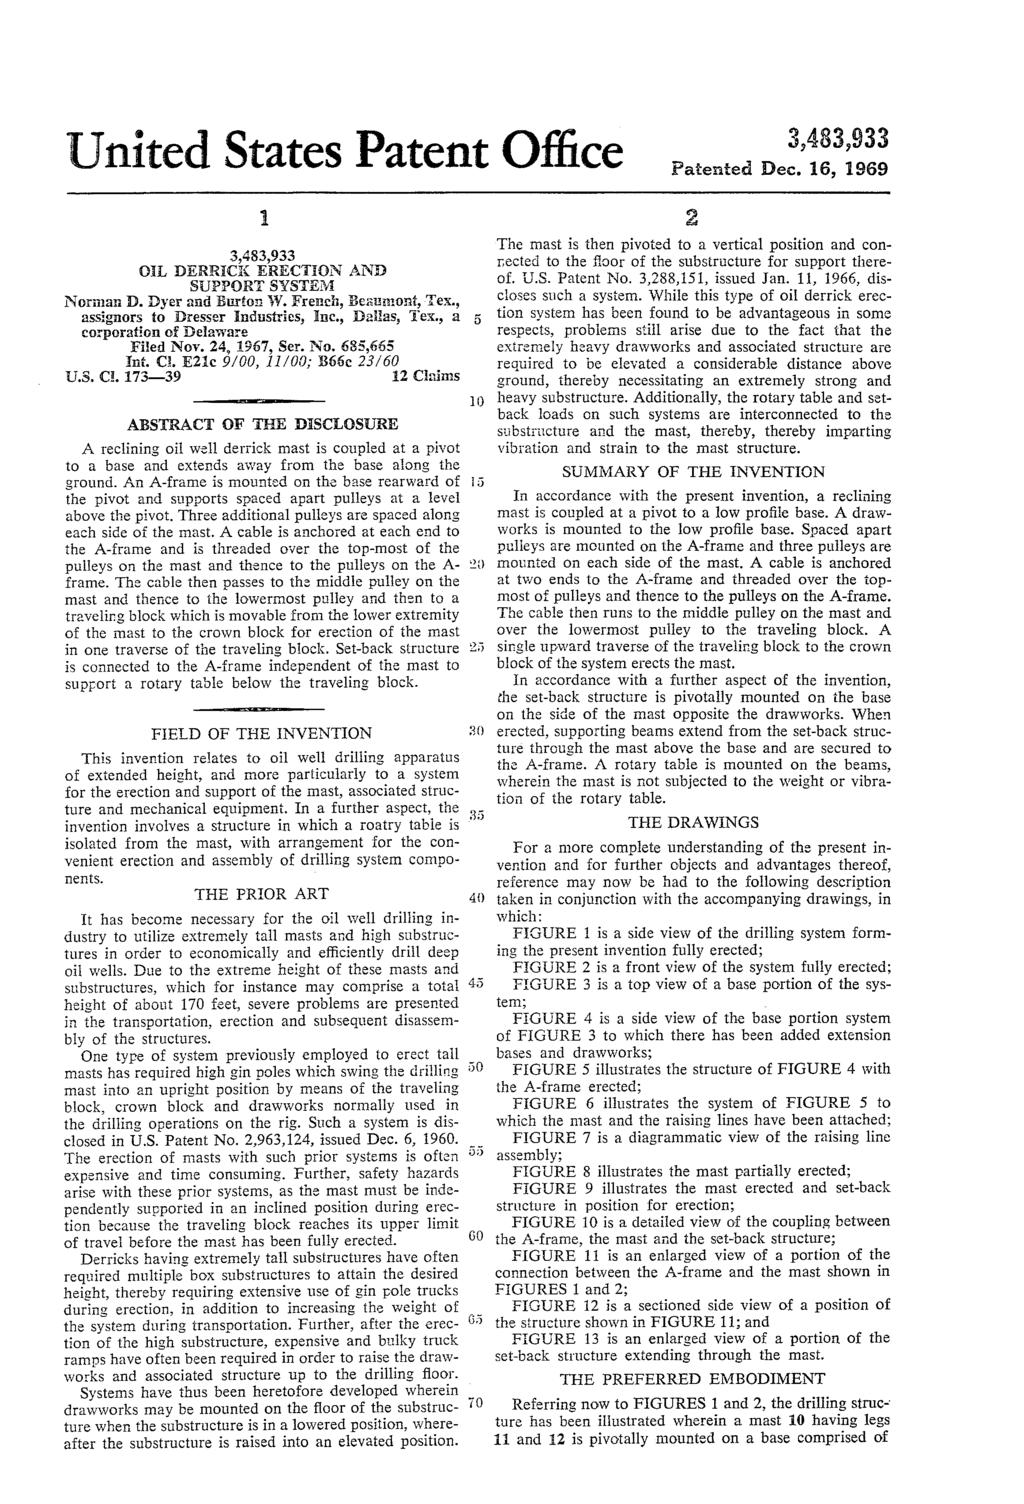 United States Patent Office Paterated Dec. 16, 1969 OL DERRICK ERECTION AND SJPPORT SYSTEy. Noriaan D. Dyer and Burfor W. French, Beatatoat, Tex., assignors to Dresser industries, Inc., Dalias, Tex.